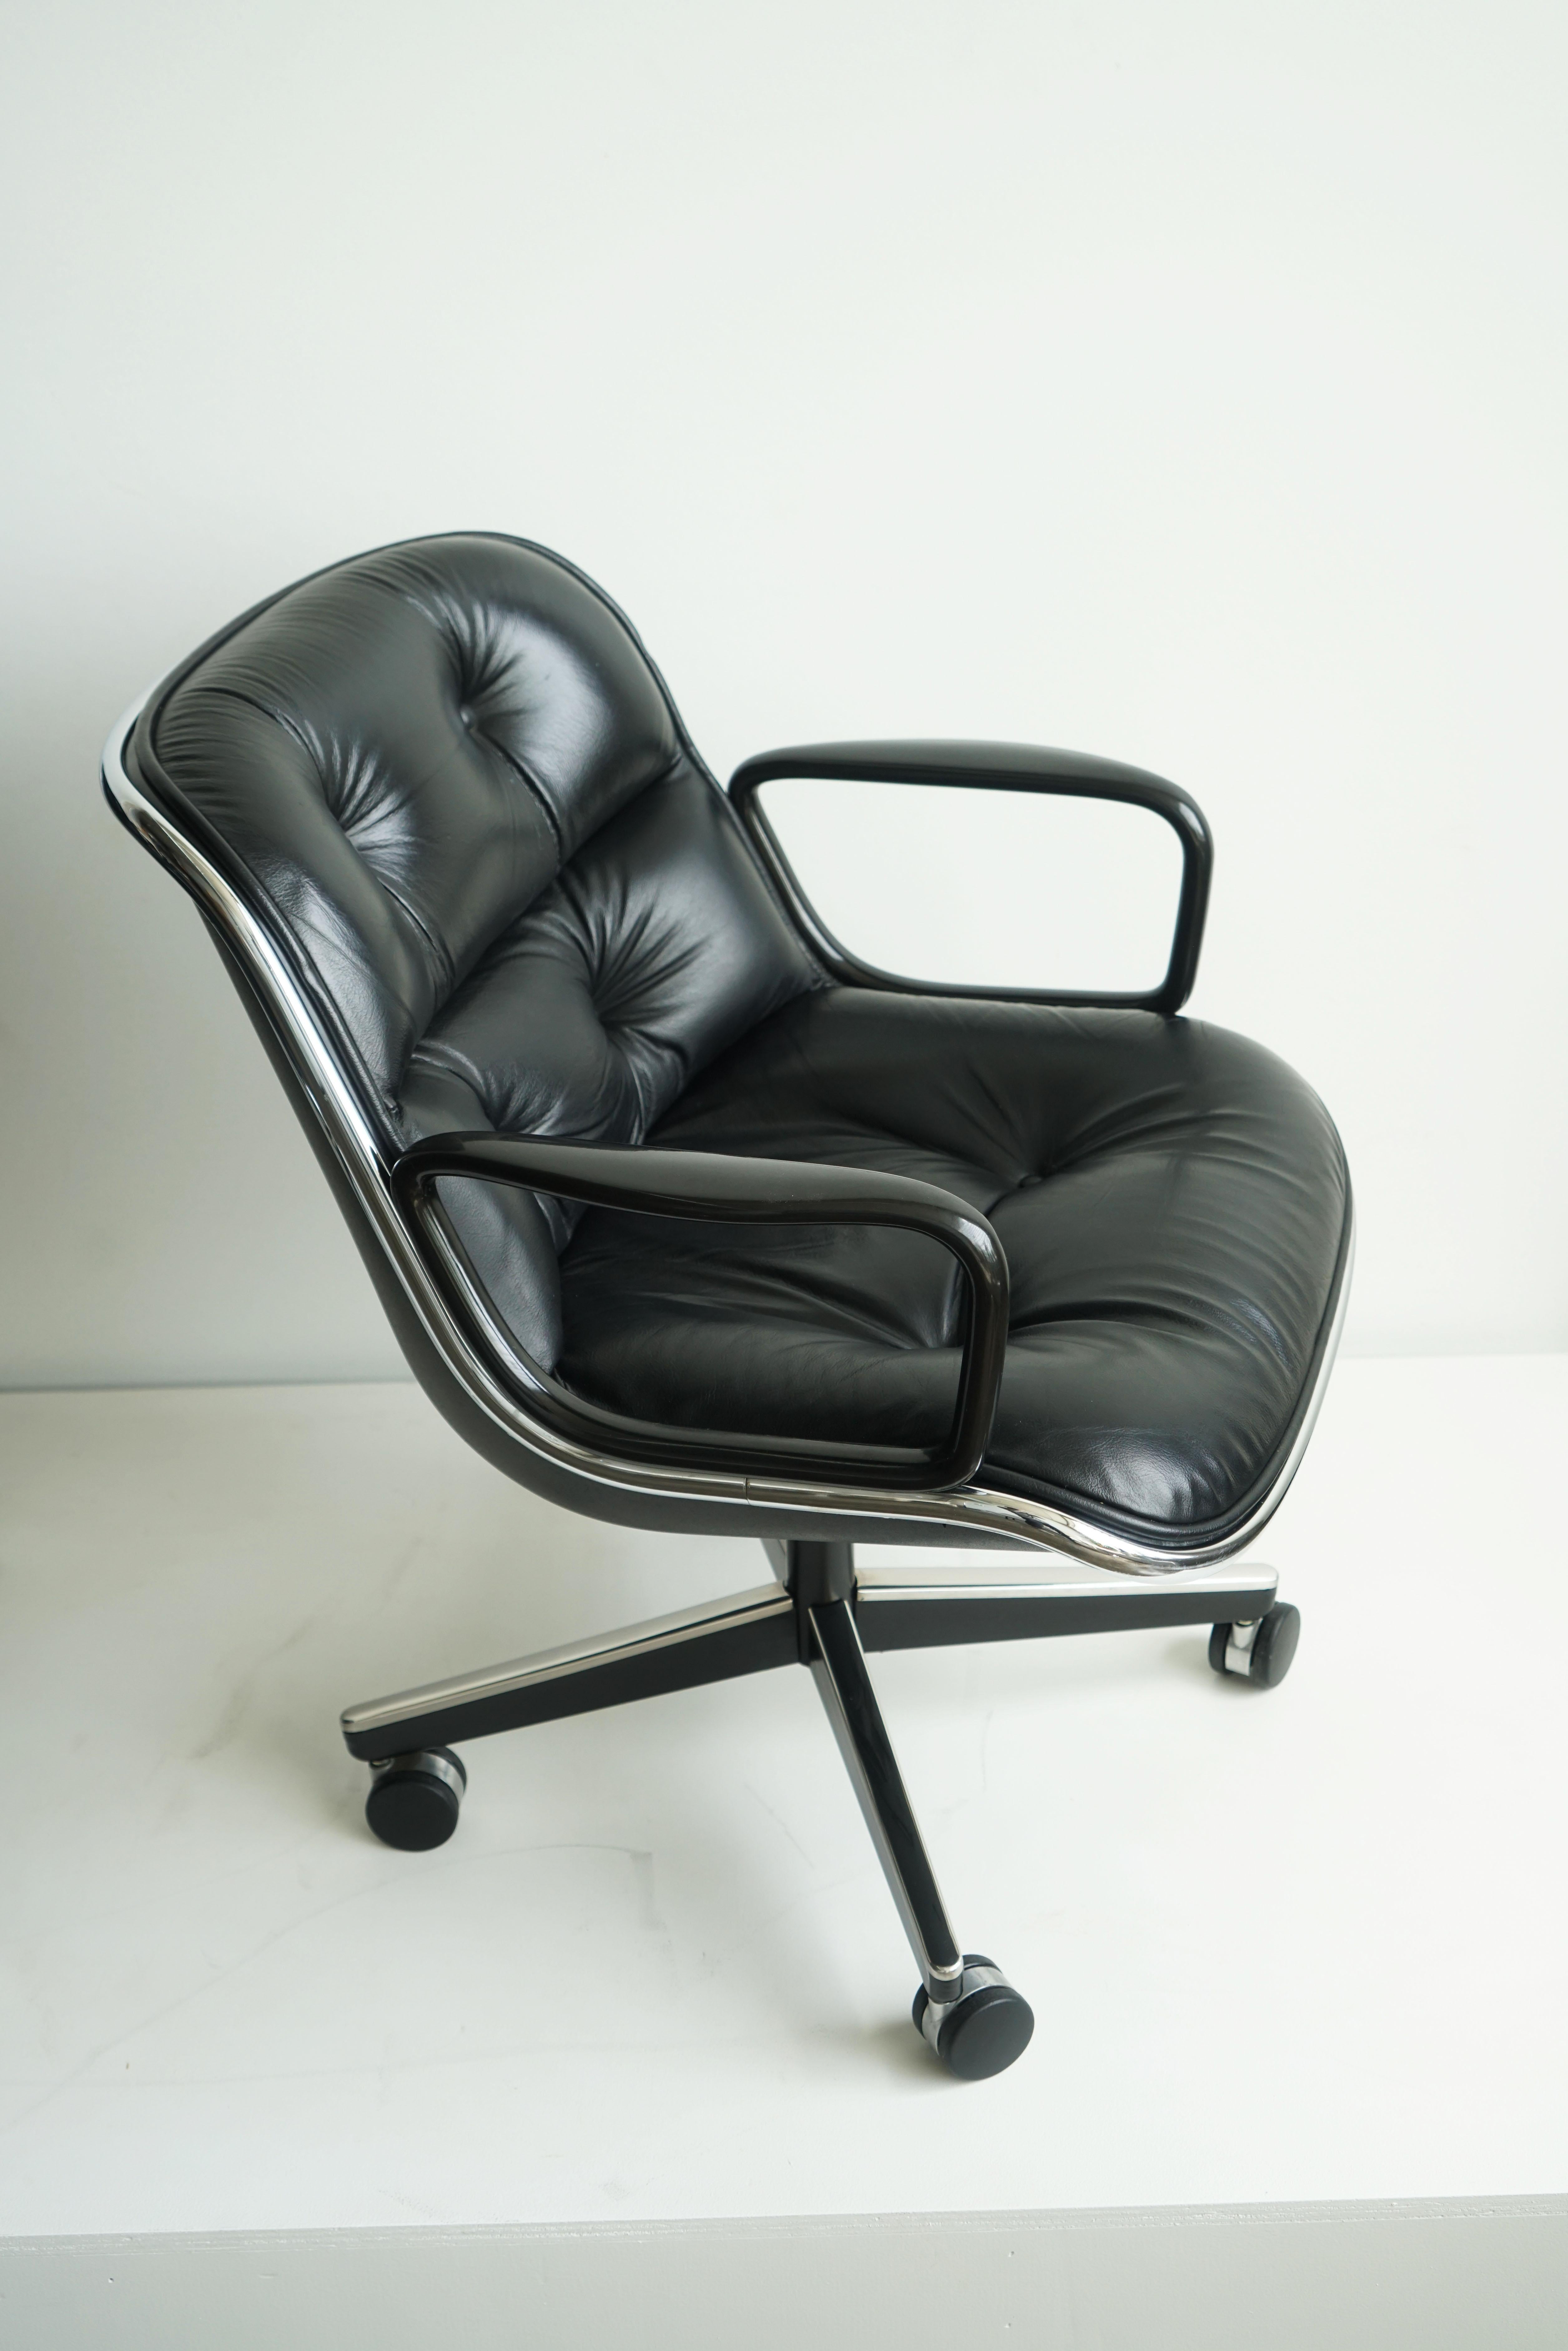 Knoll Charles Pollock Executive Desk Chairs in Black Leather In Good Condition For Sale In Chicago, IL